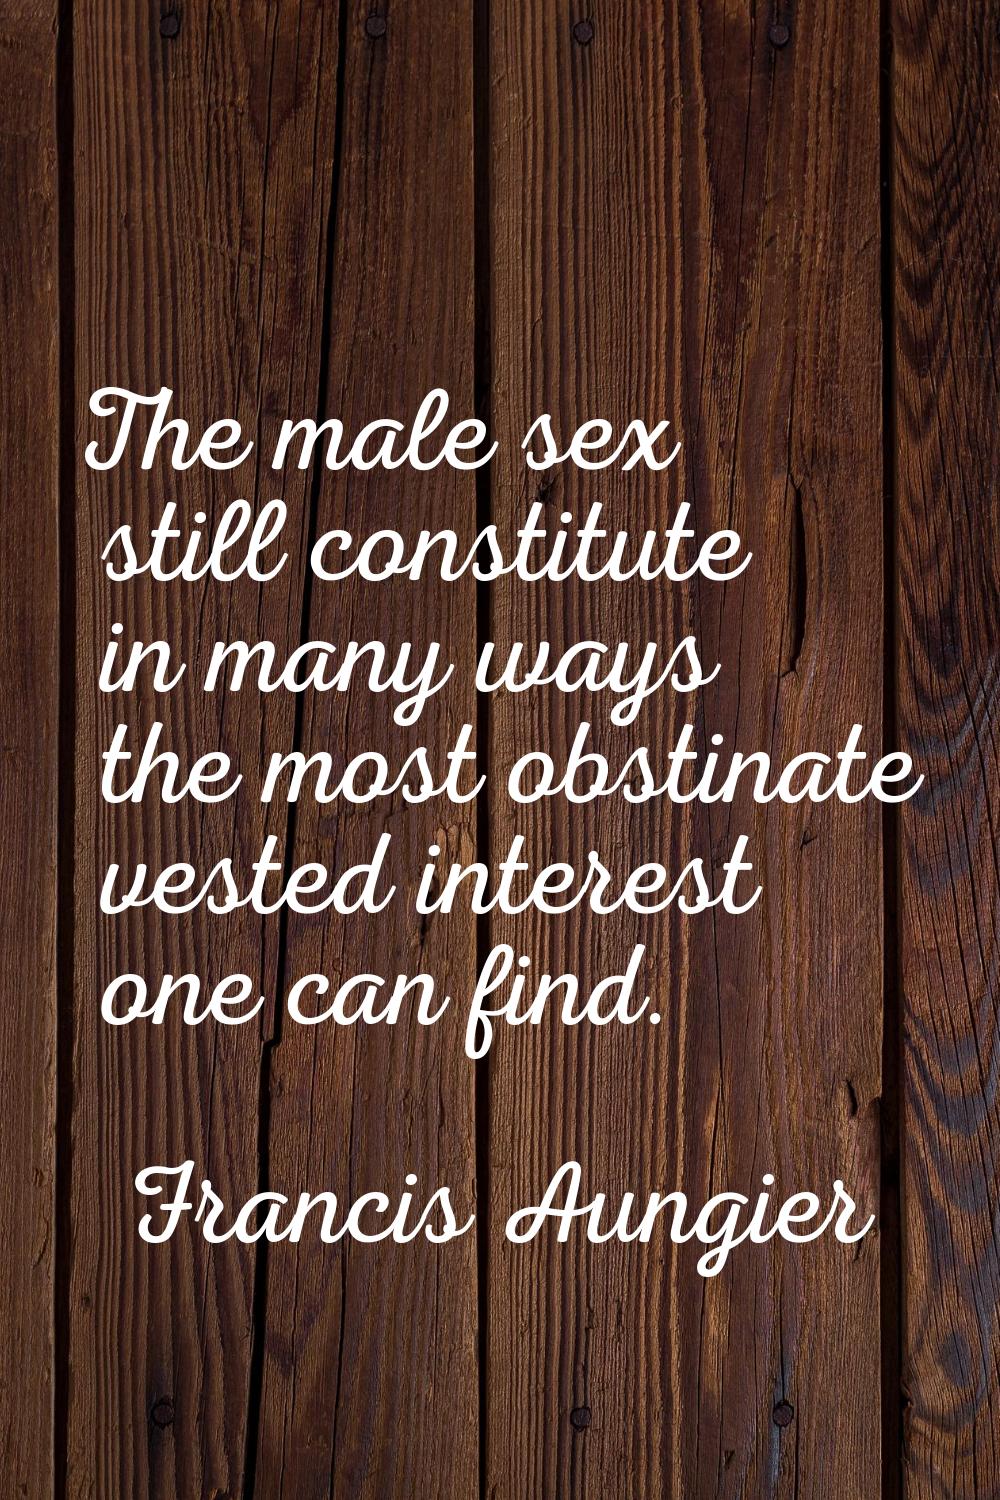 The male sex still constitute in many ways the most obstinate vested interest one can find.